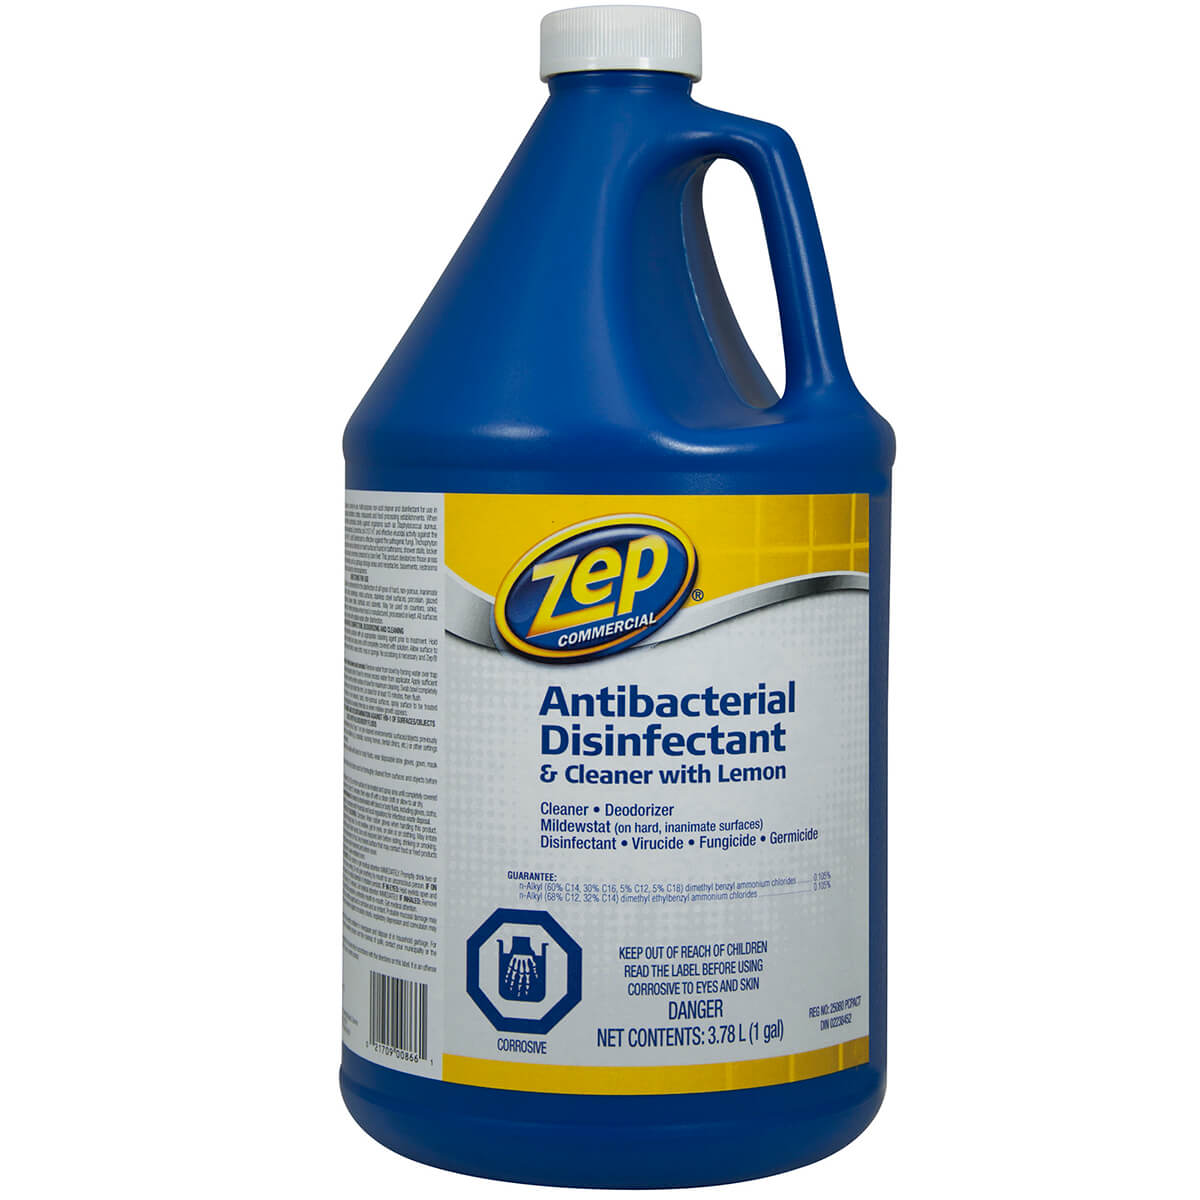 Zep Commercial Anti-Bacterial Disinfectant - 3.78 L